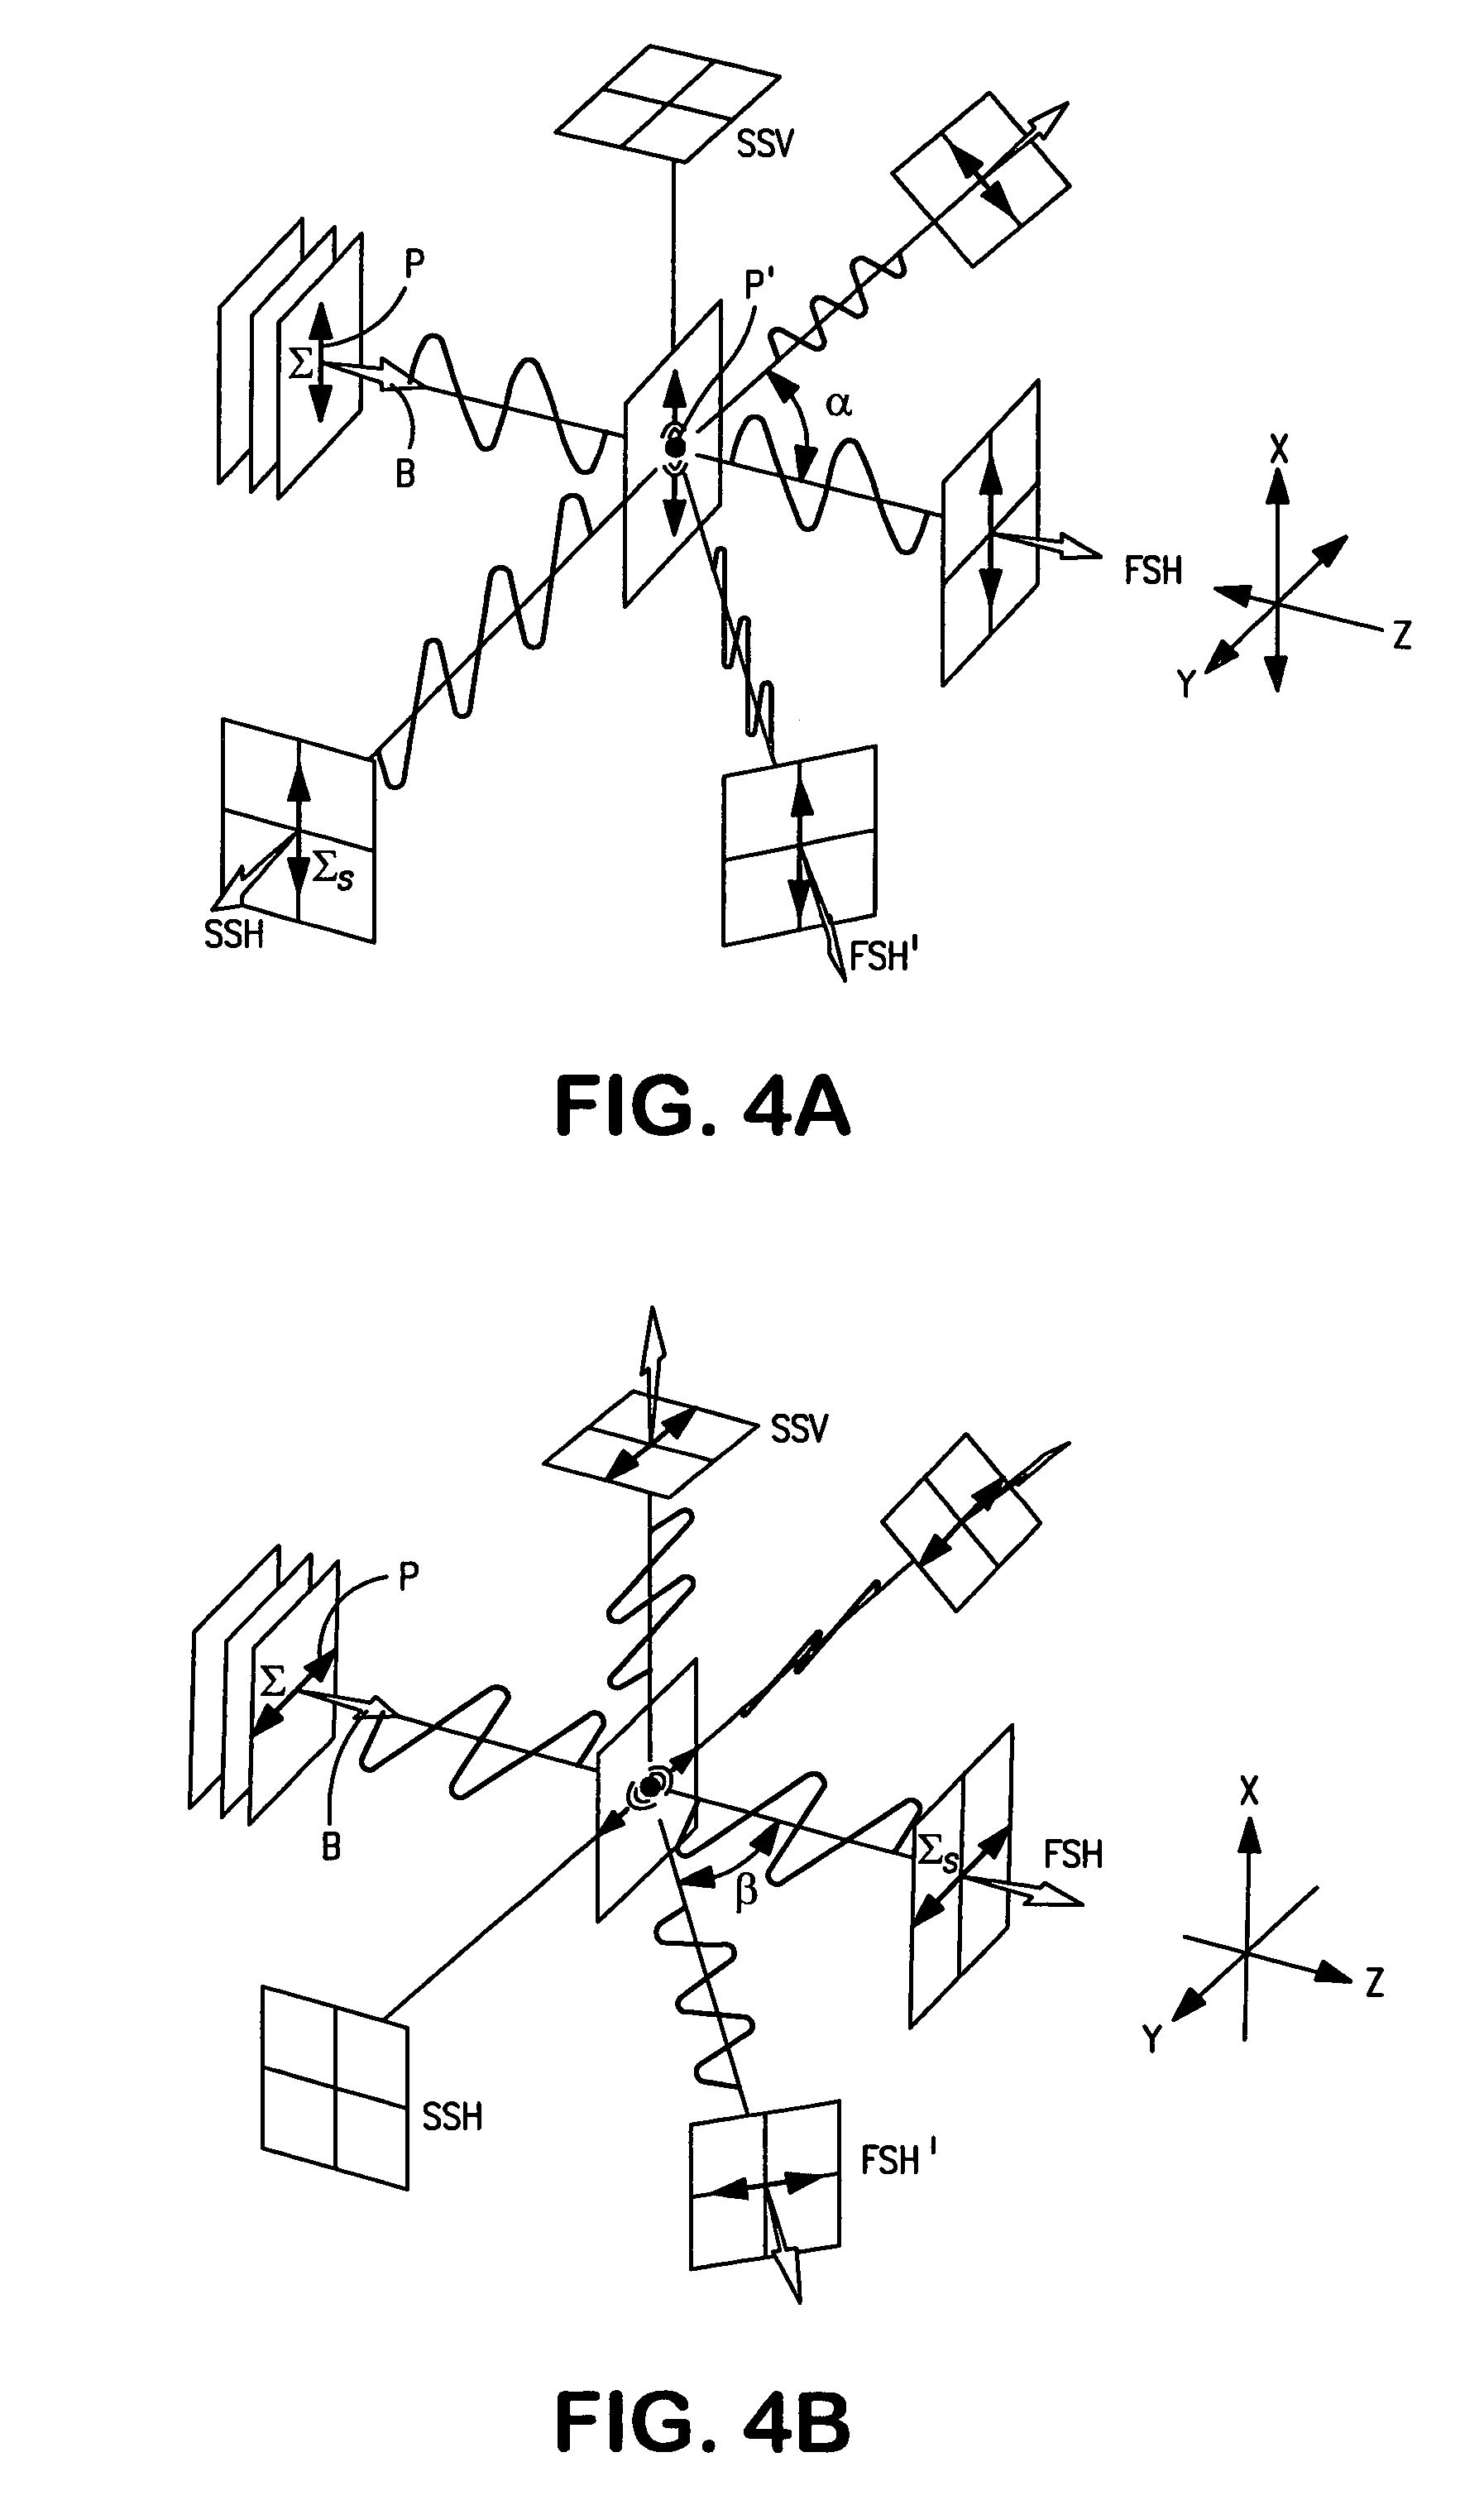 Flow cytometer for differentiating small particles in suspension